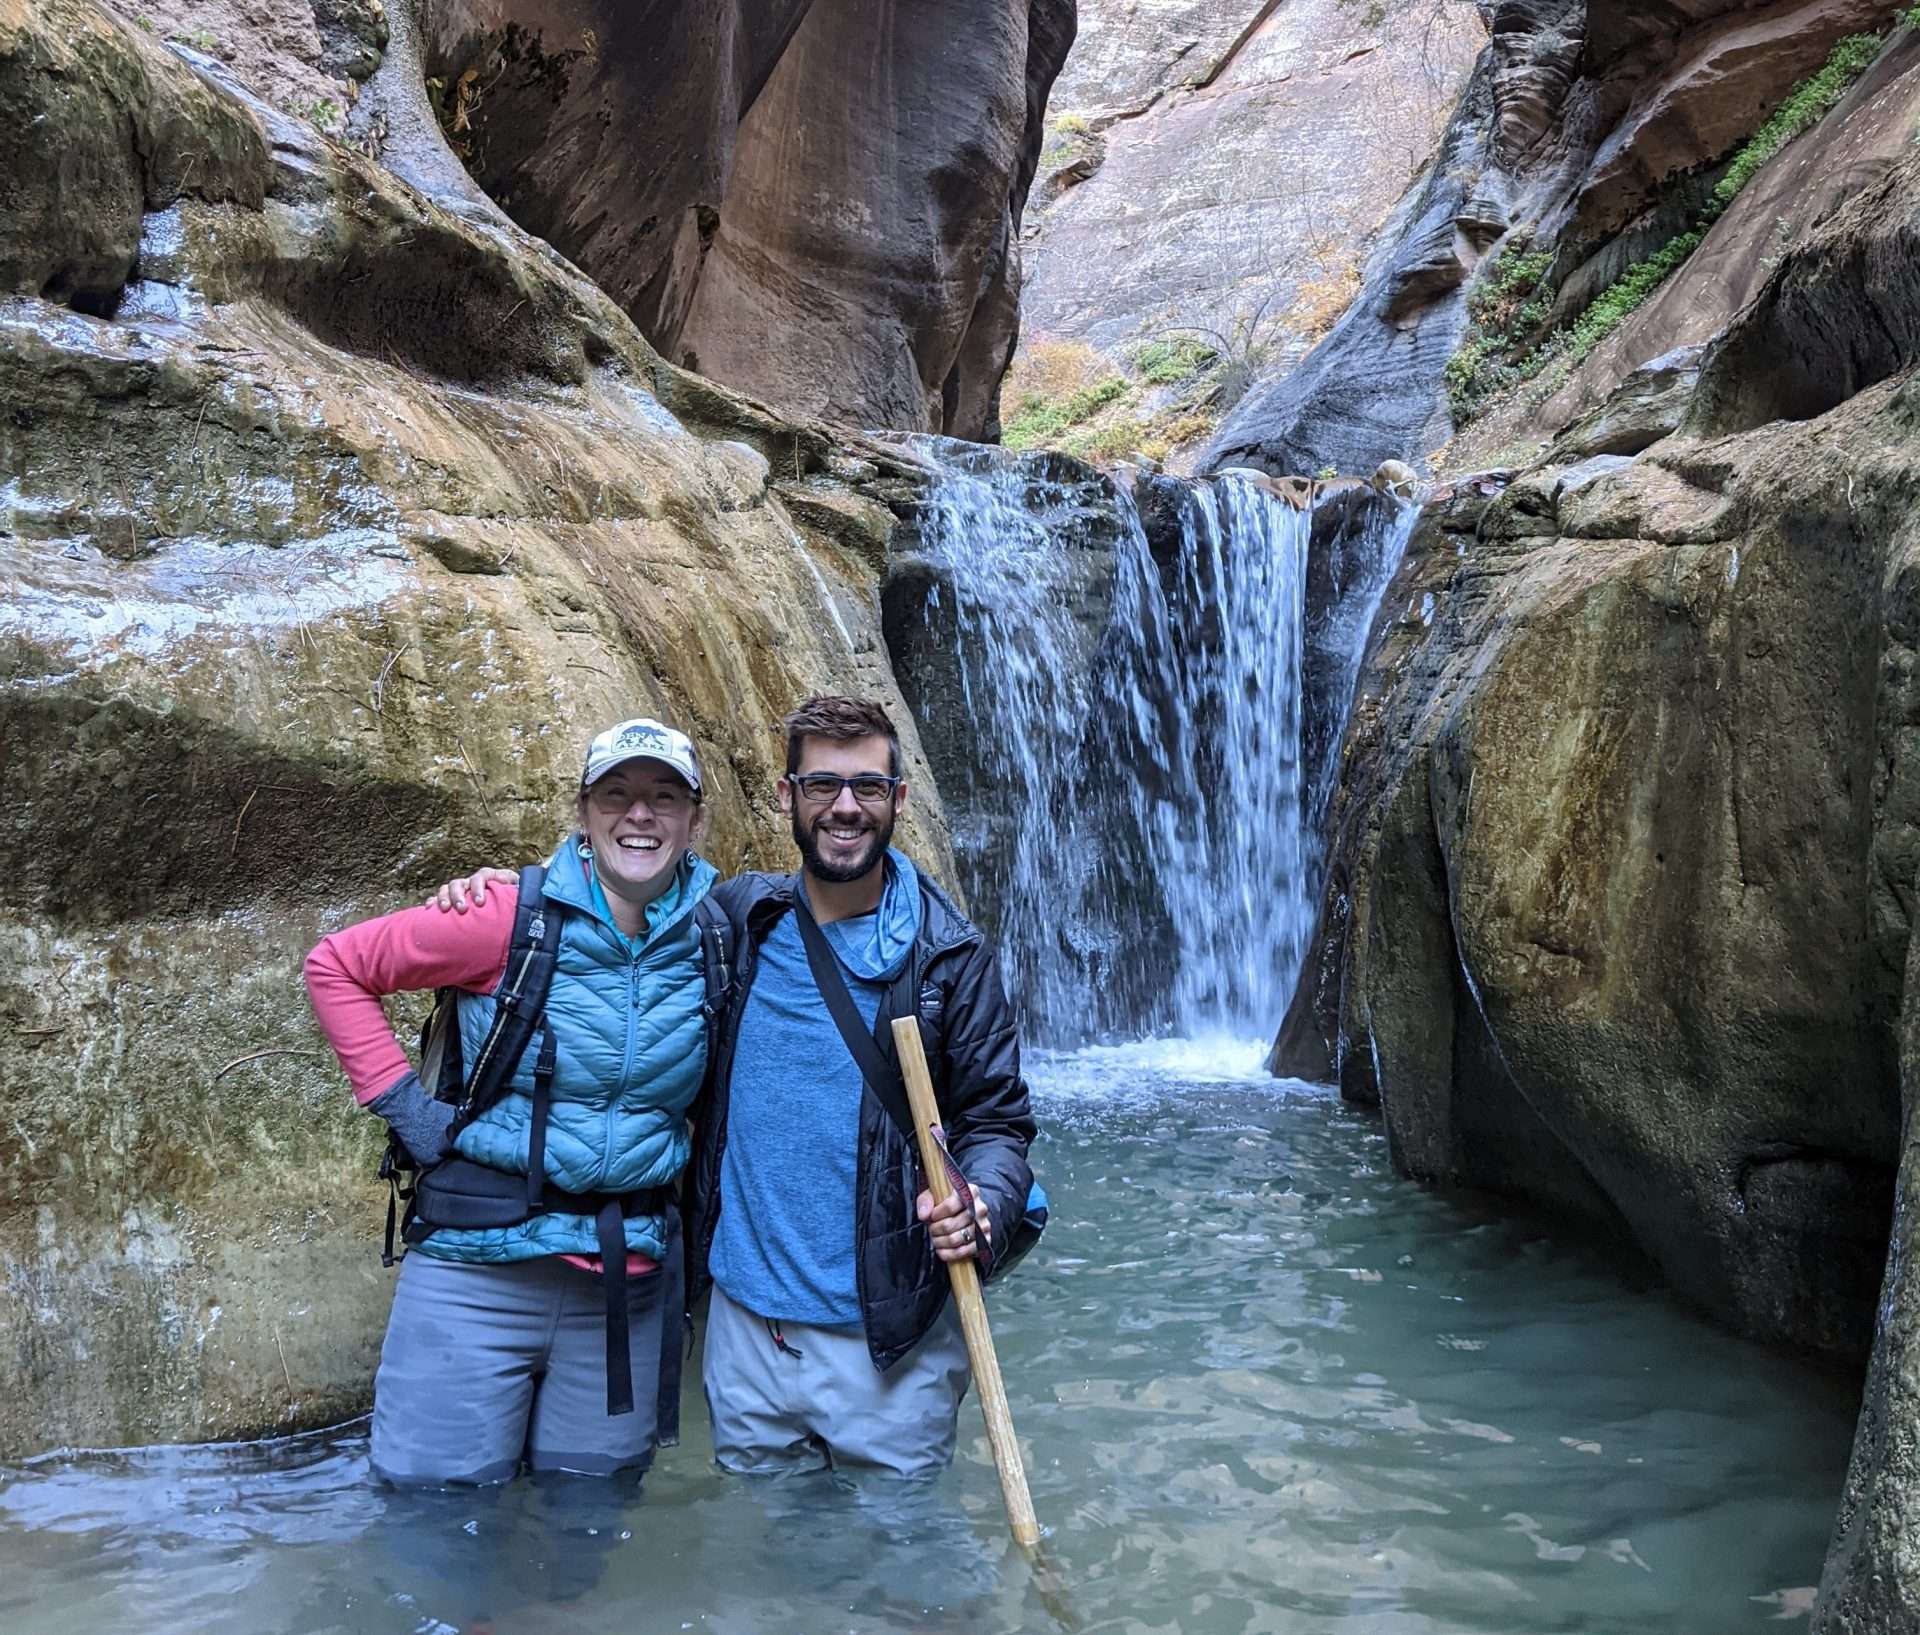 Tom and Cait hiking in Zion National Park